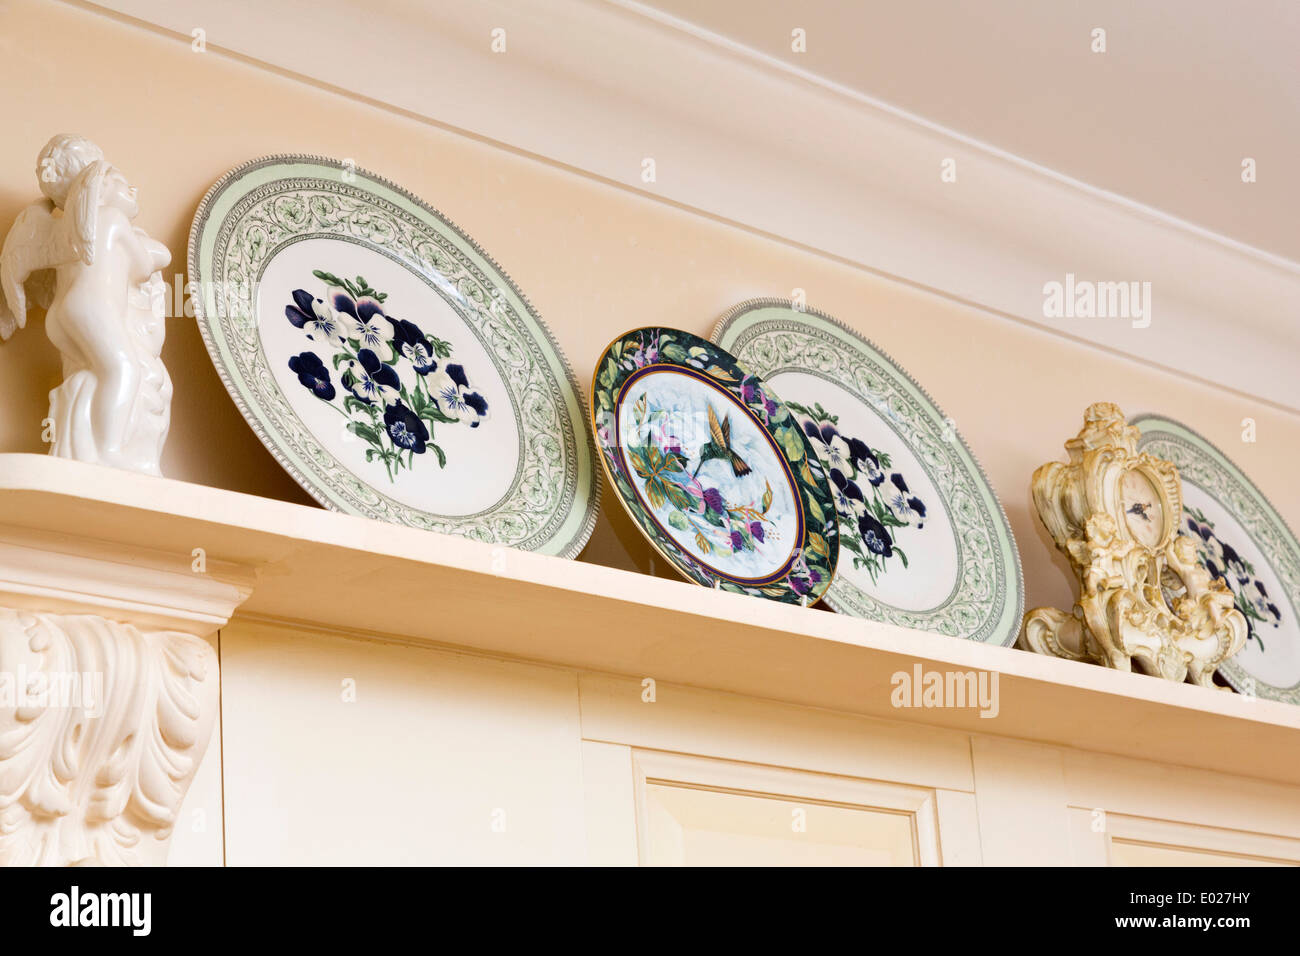 plates on display in a kitchen Stock Photo